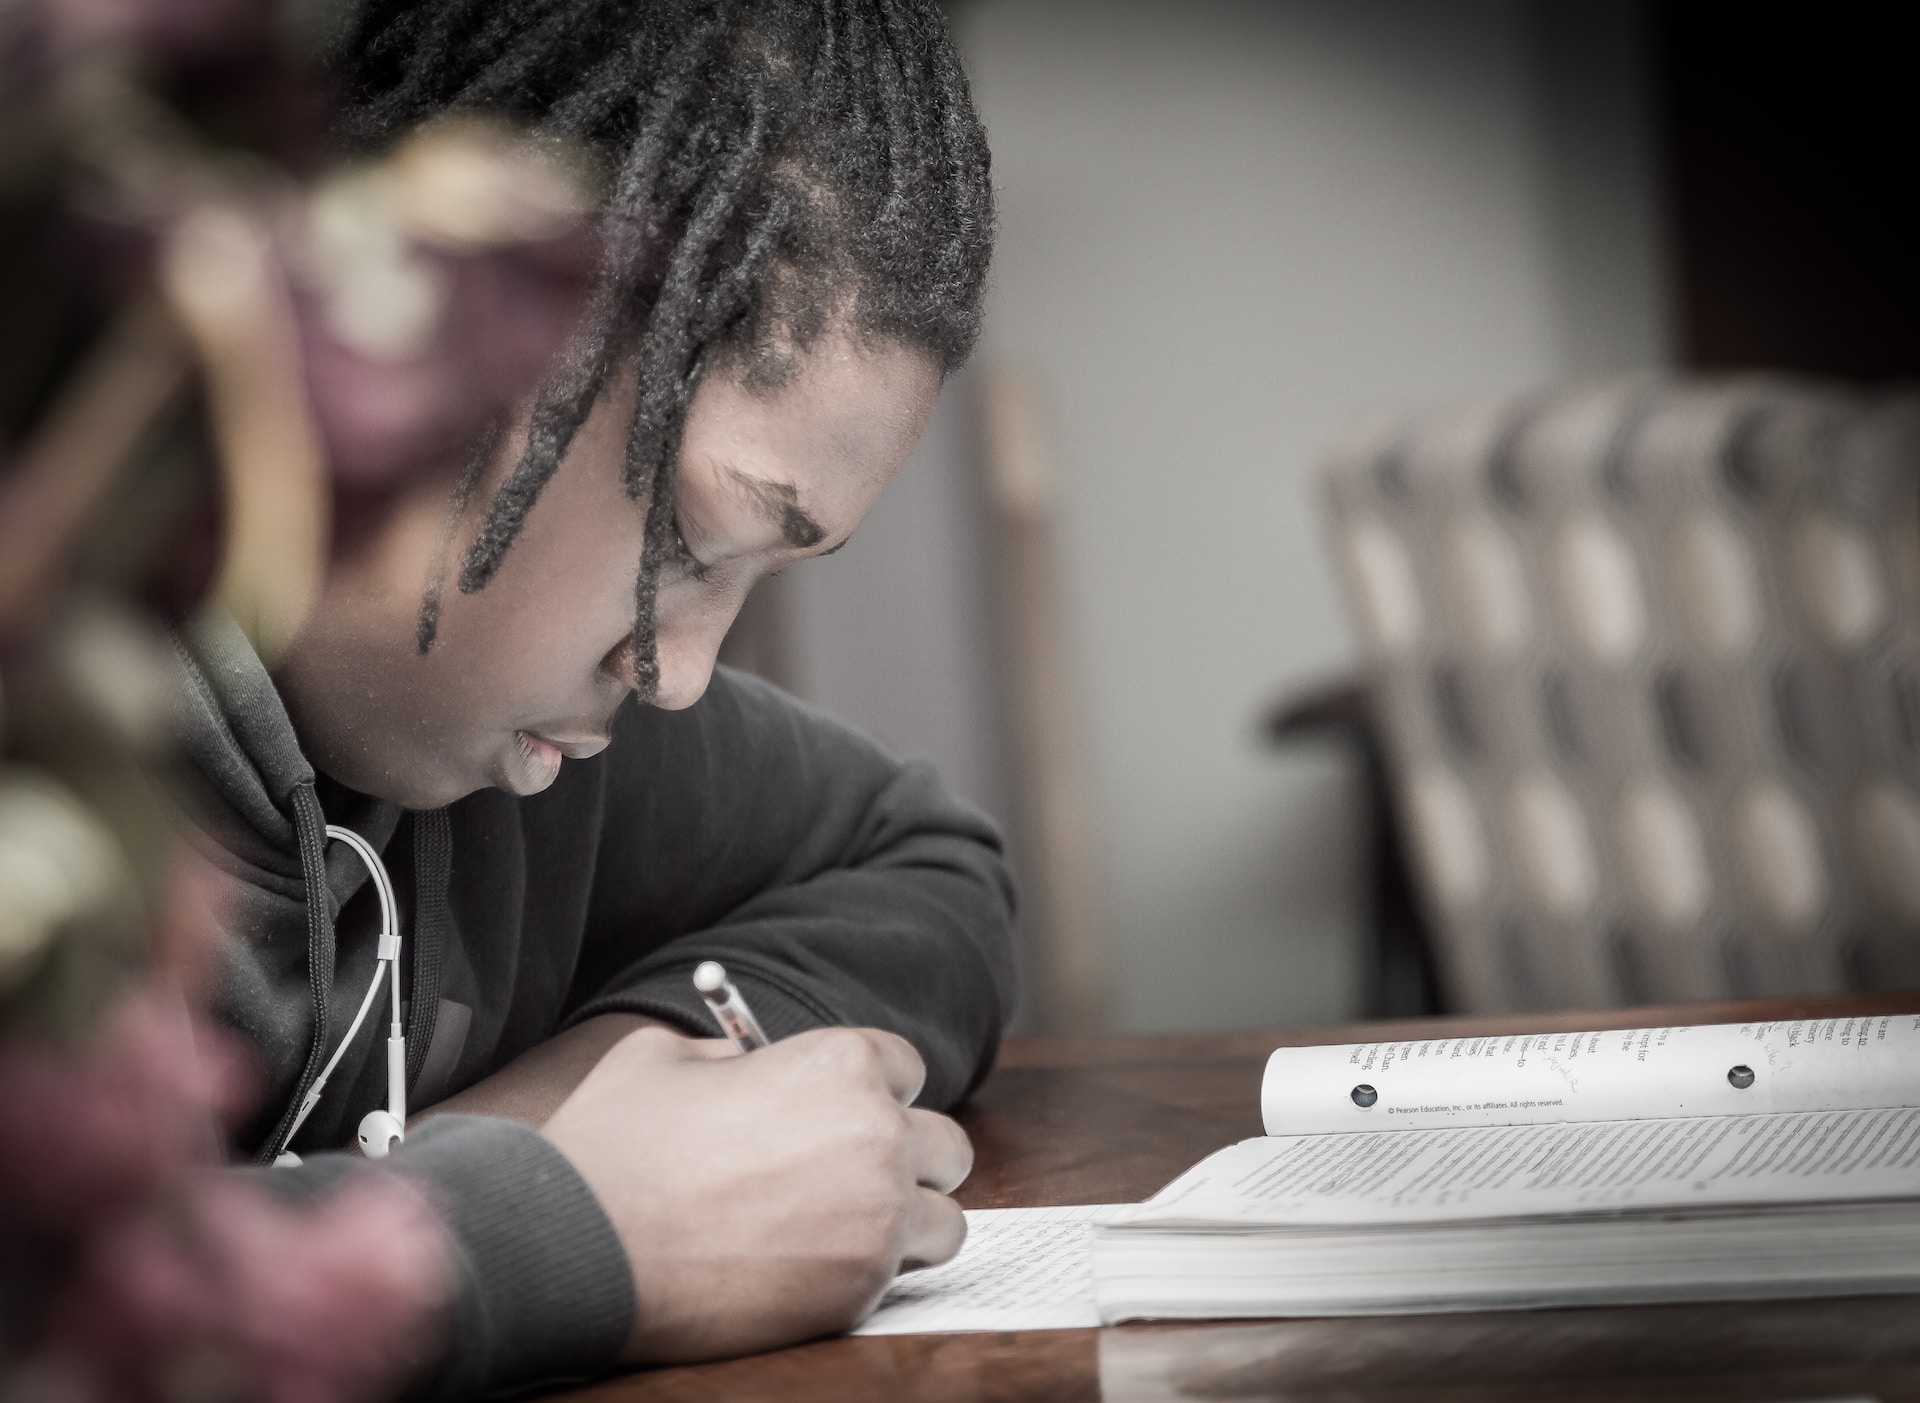 What is Dysgraphia? Understanding Dysgraphia with Tips and Resources